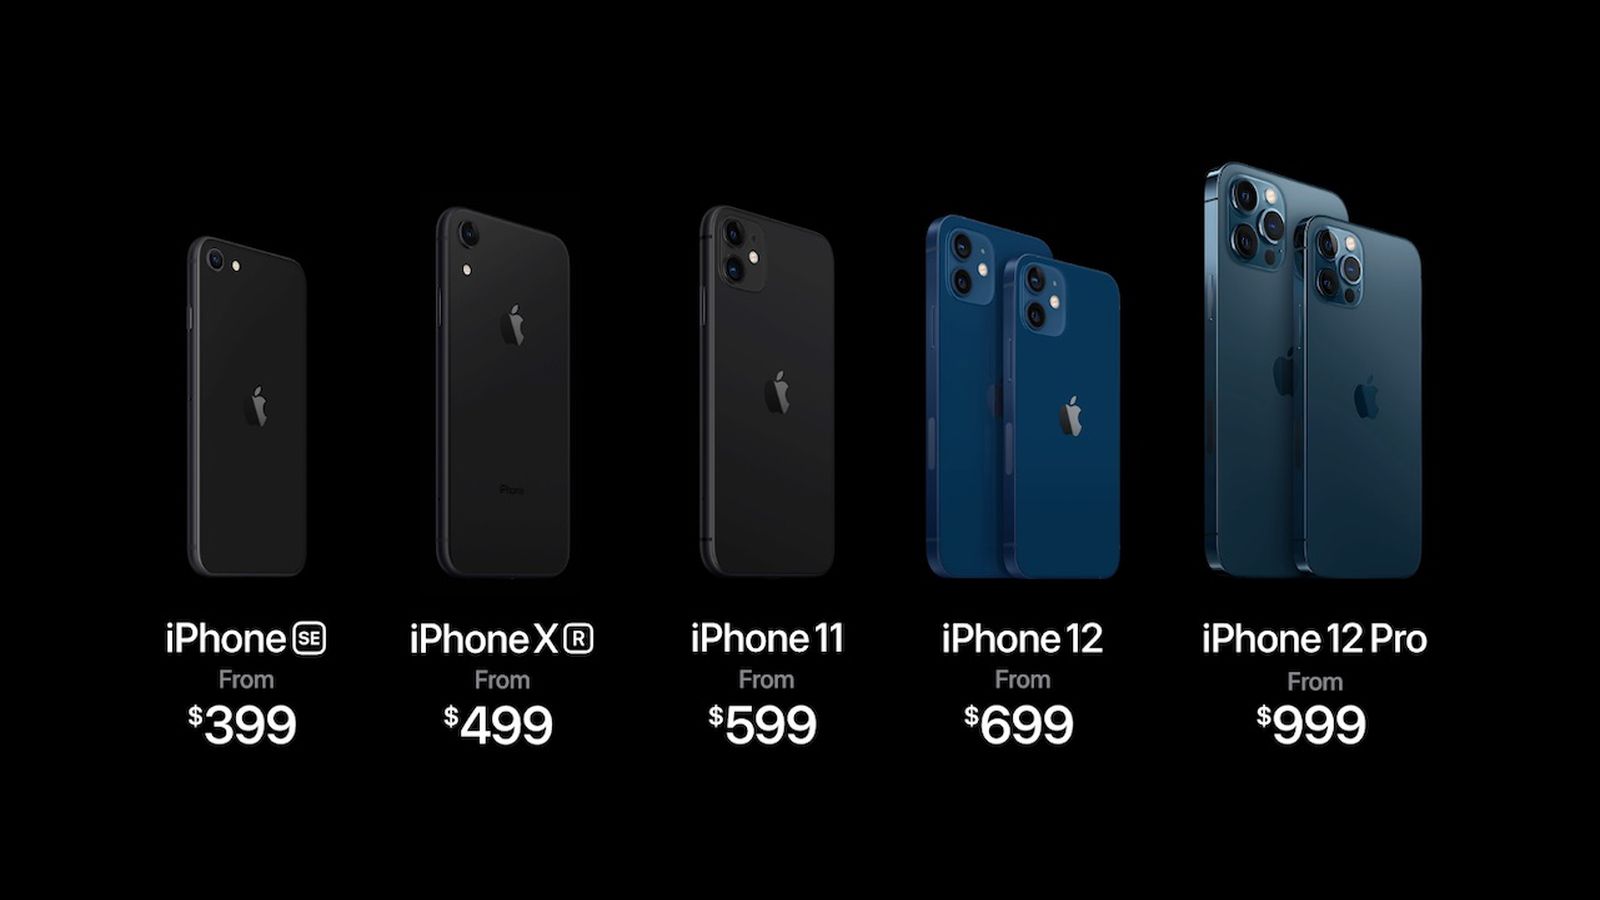 Iphone Xr And Iphone 11 Still Available As Low Cost Options Iphone 11 Pro Models Discontinued Macrumors